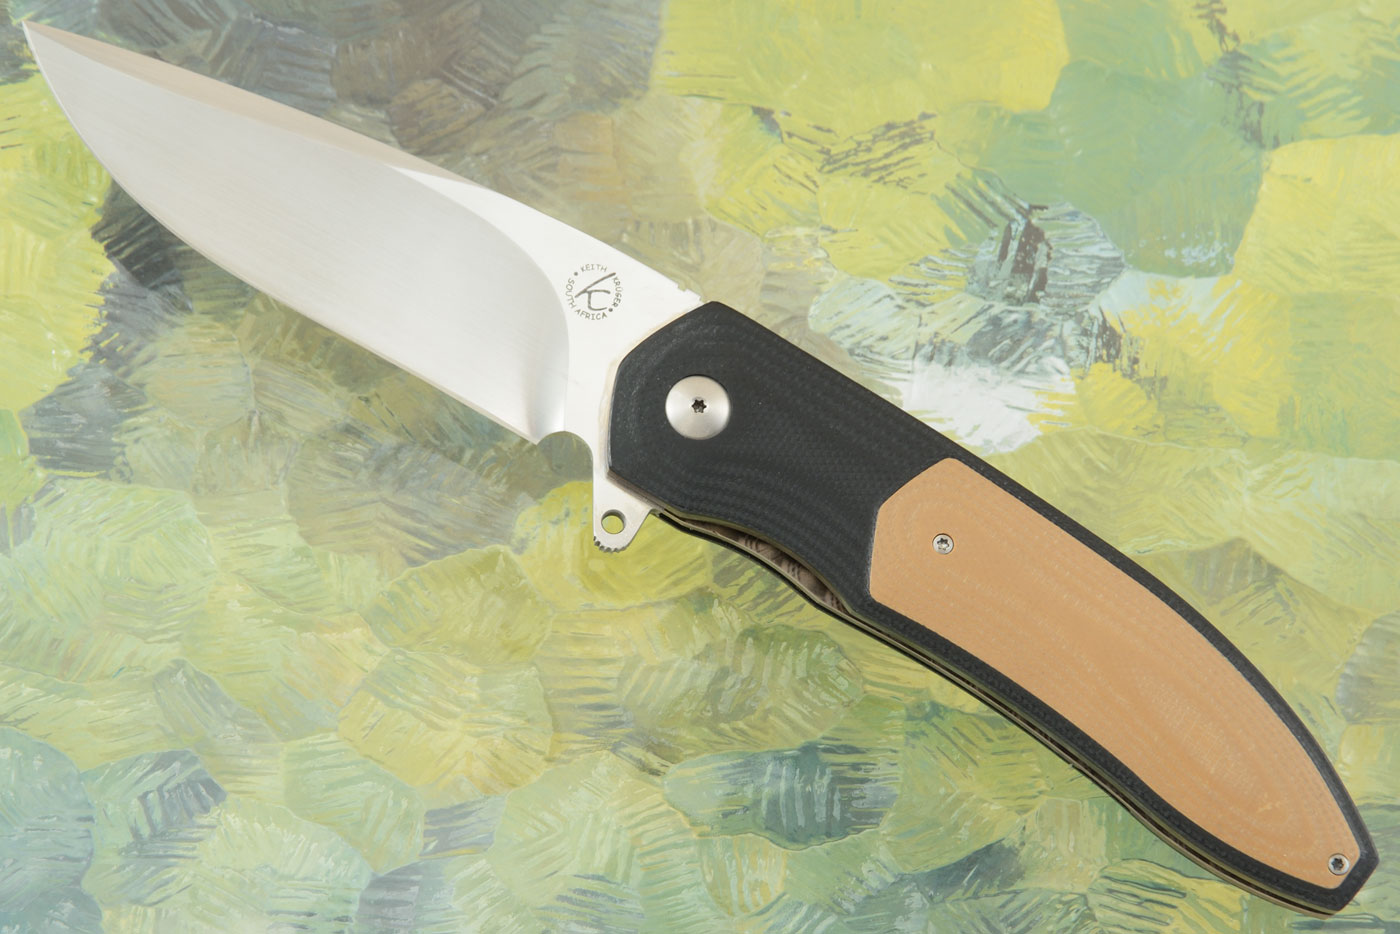 K4 Flipper with Black and Coyote Tan G10 (Ceramic IKBS)